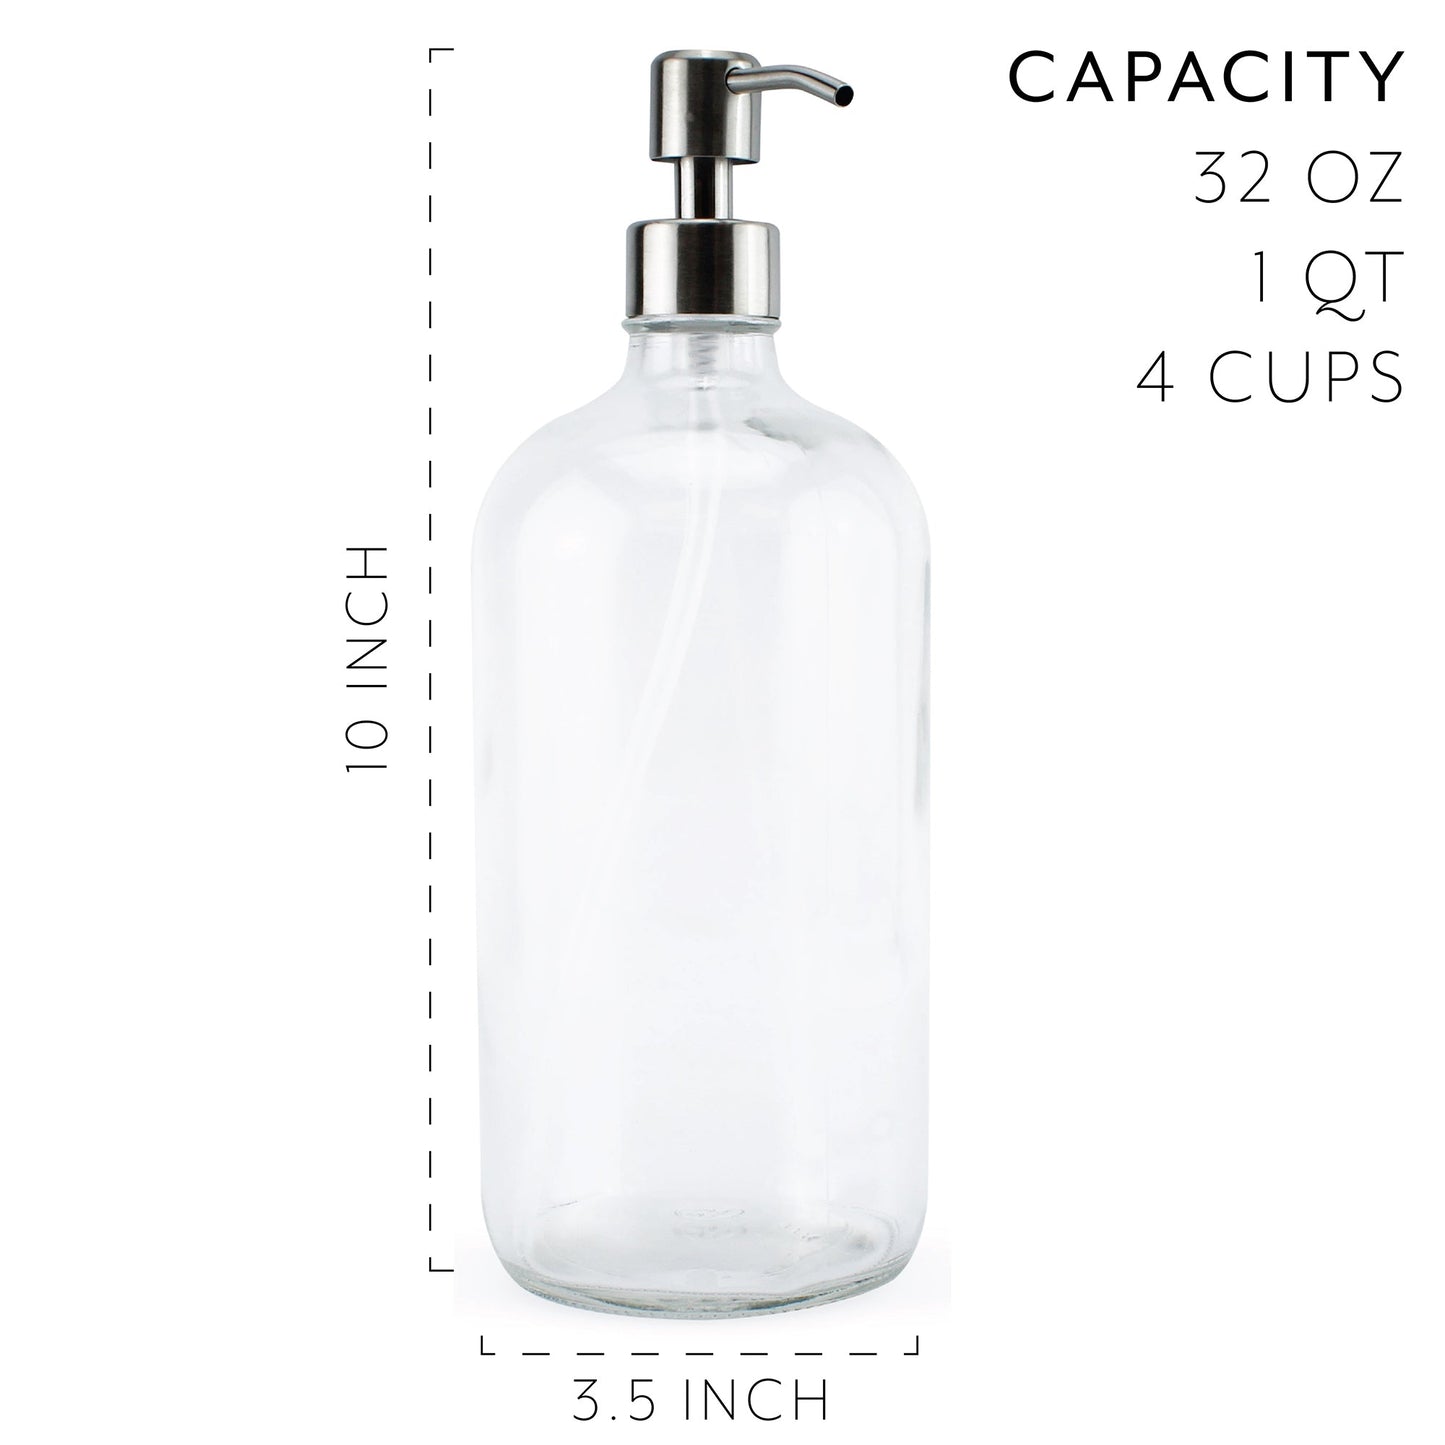 32oz Glass Pump Bottles with Stainless Steel Pump (2-Pack, Clear) - sh1772cb032oz